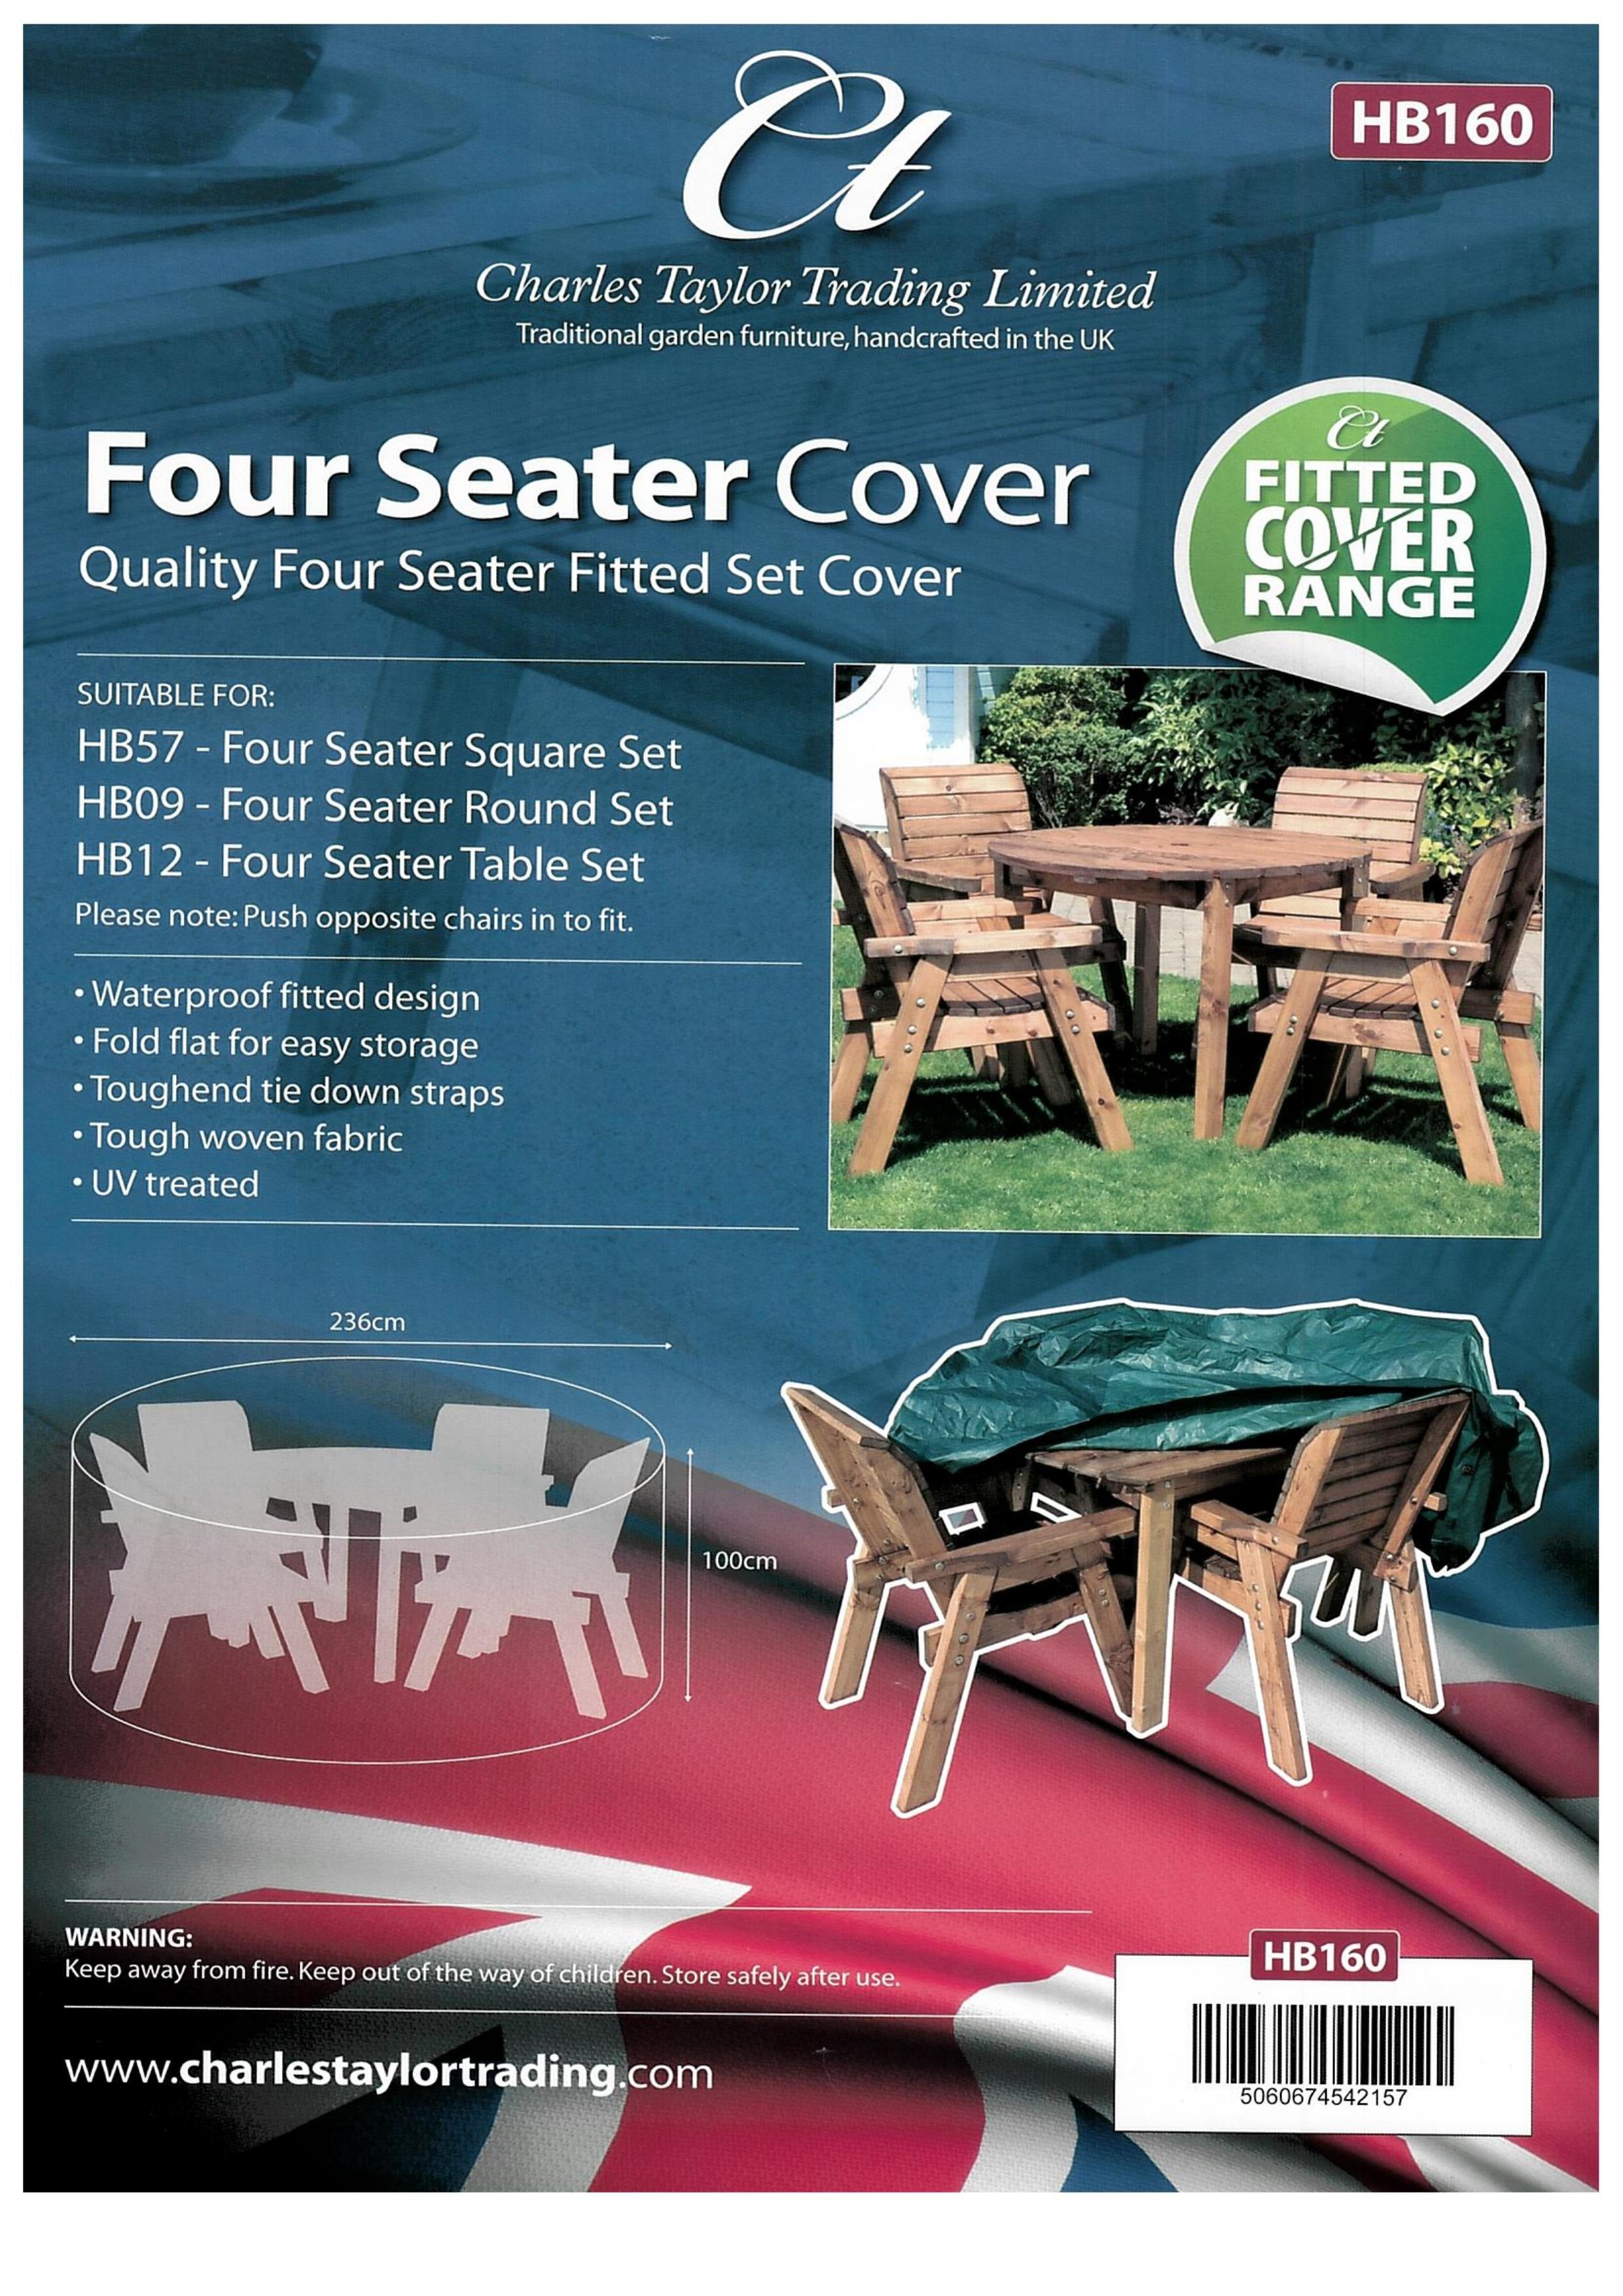 HB160 - Deluxe Fitted Four Seater Table Set Cover